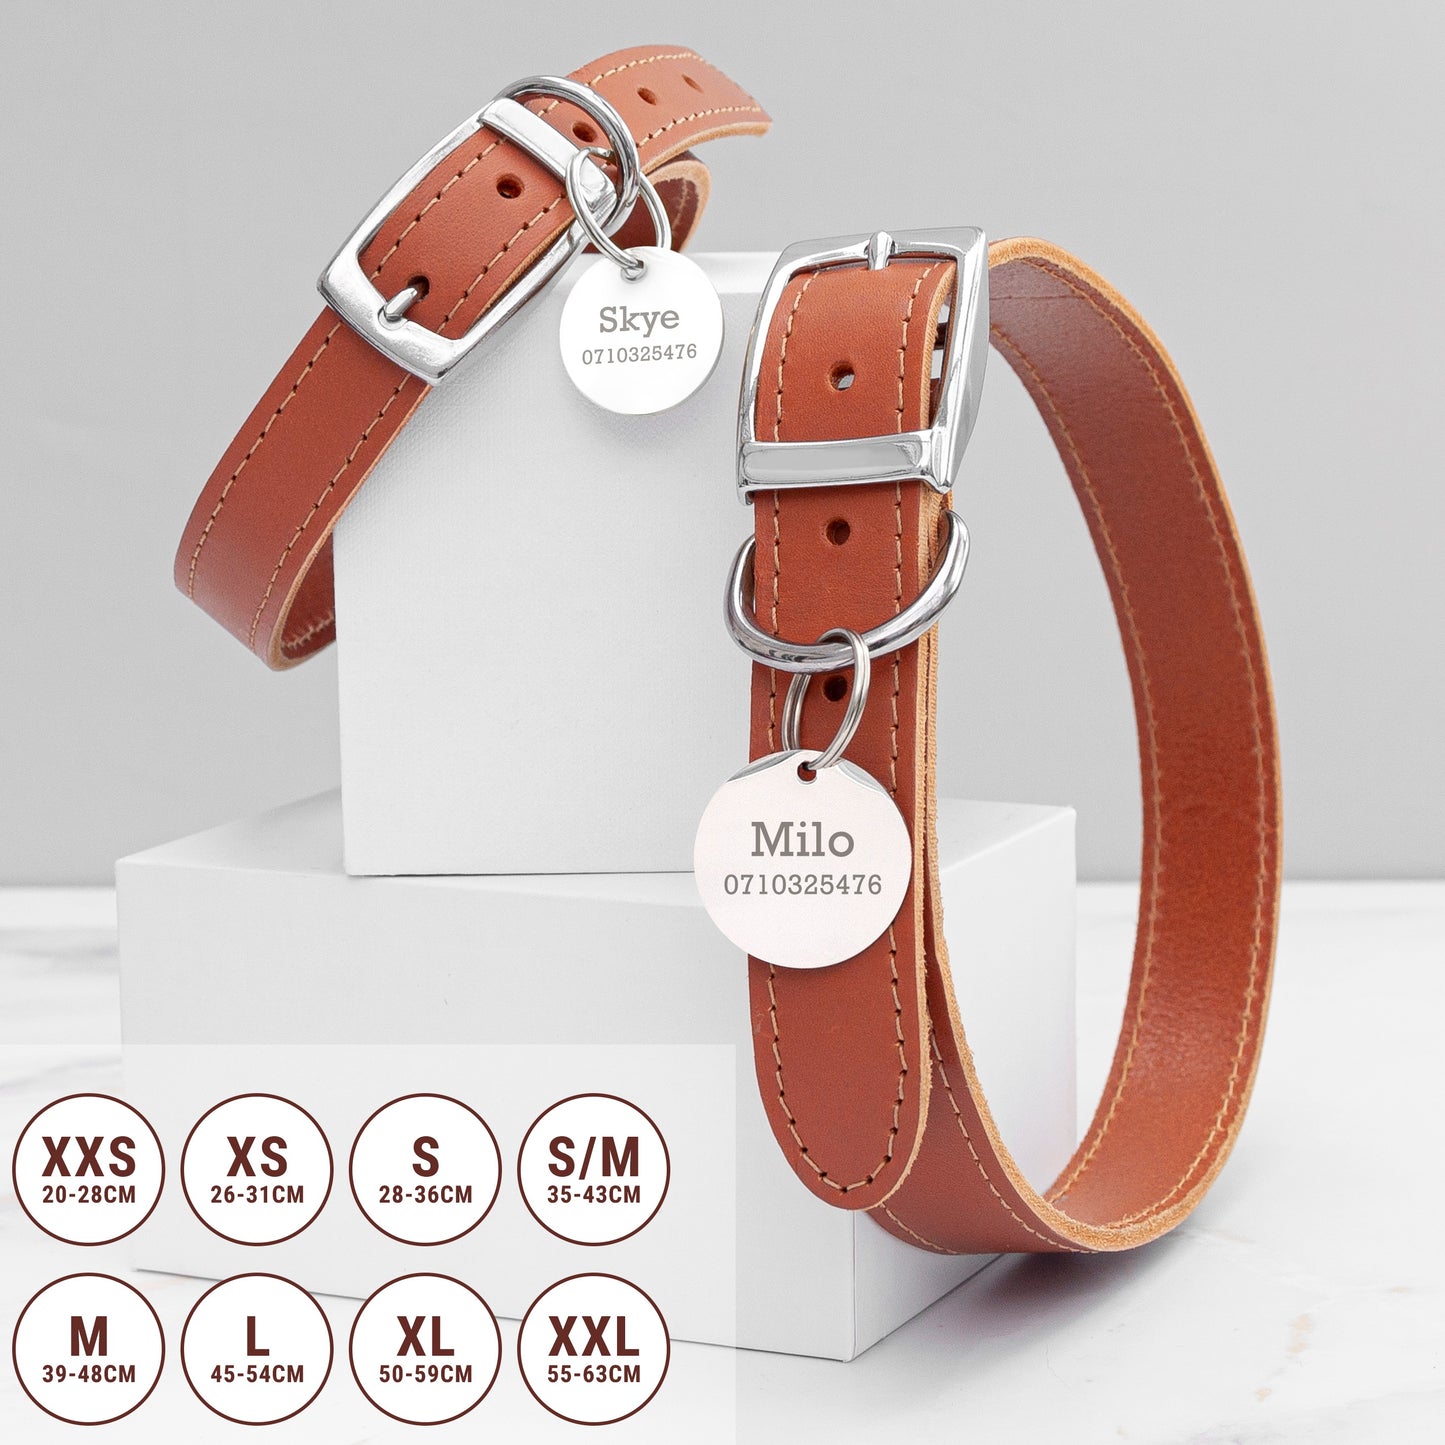 Personalised Leather Pet Collar in Three Colours